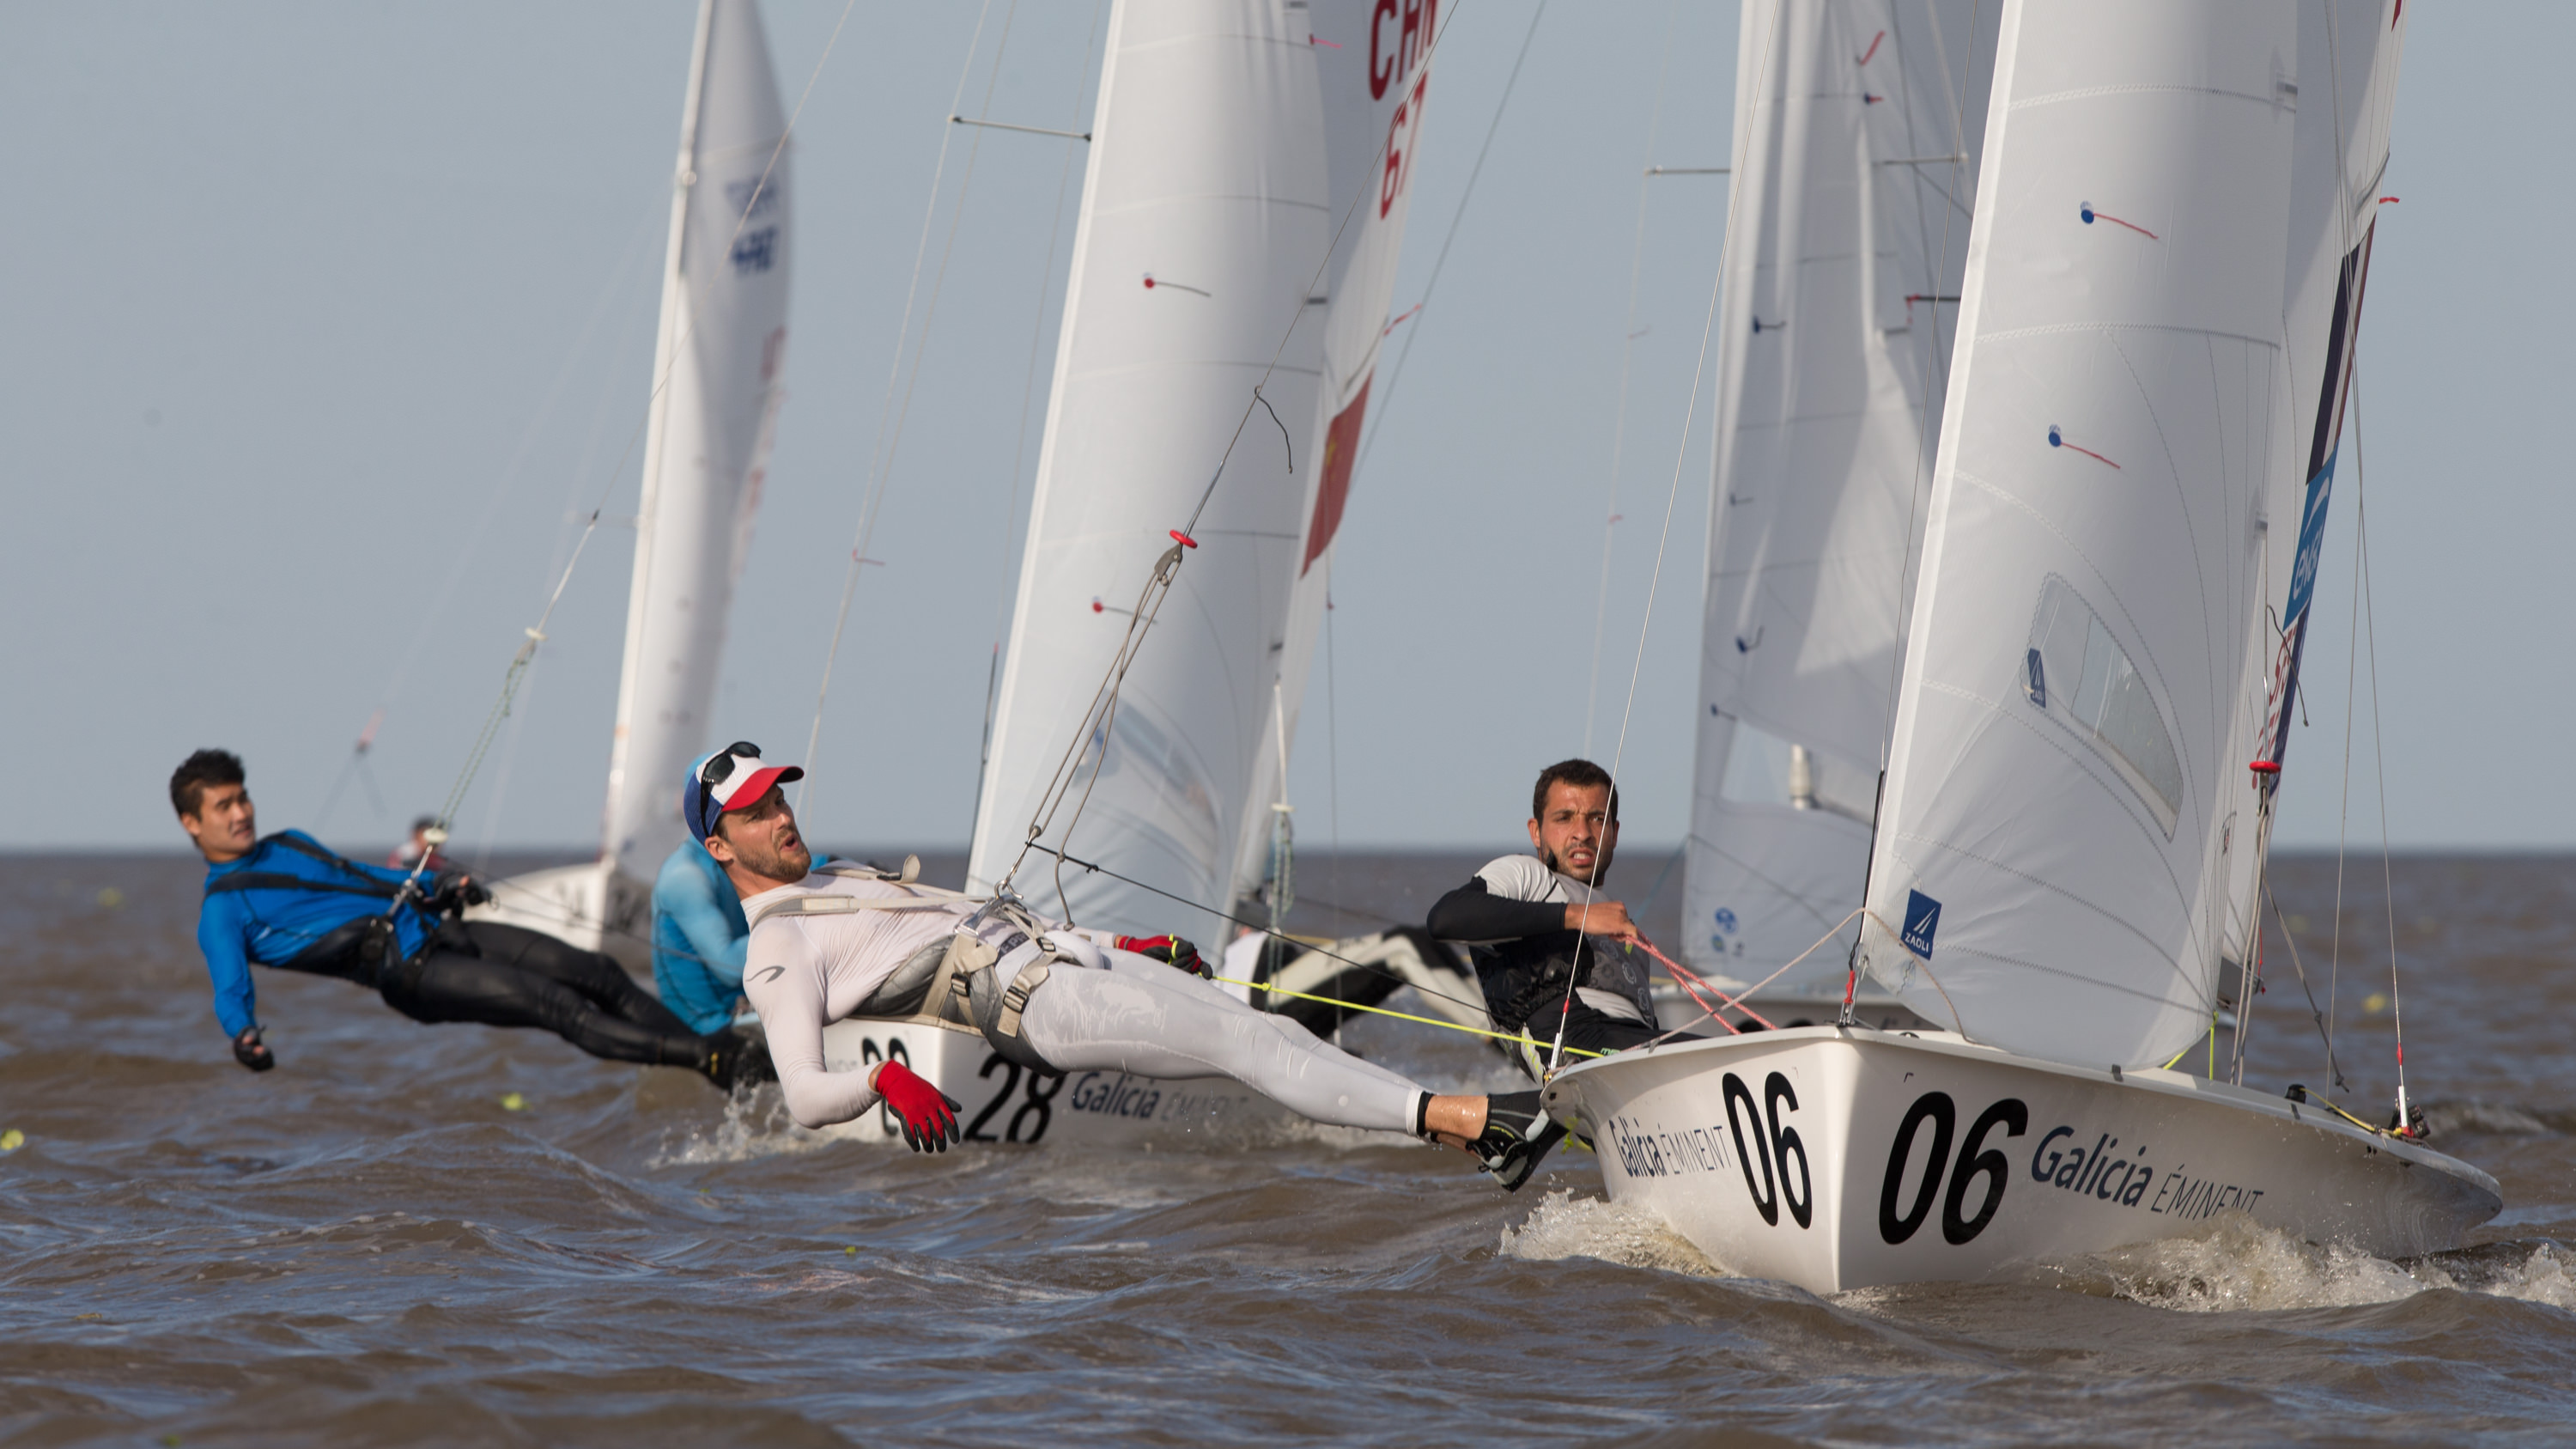 Sofian Bouvet/Jeremie Mion (FRA) racing at the 2016 470 Worlds